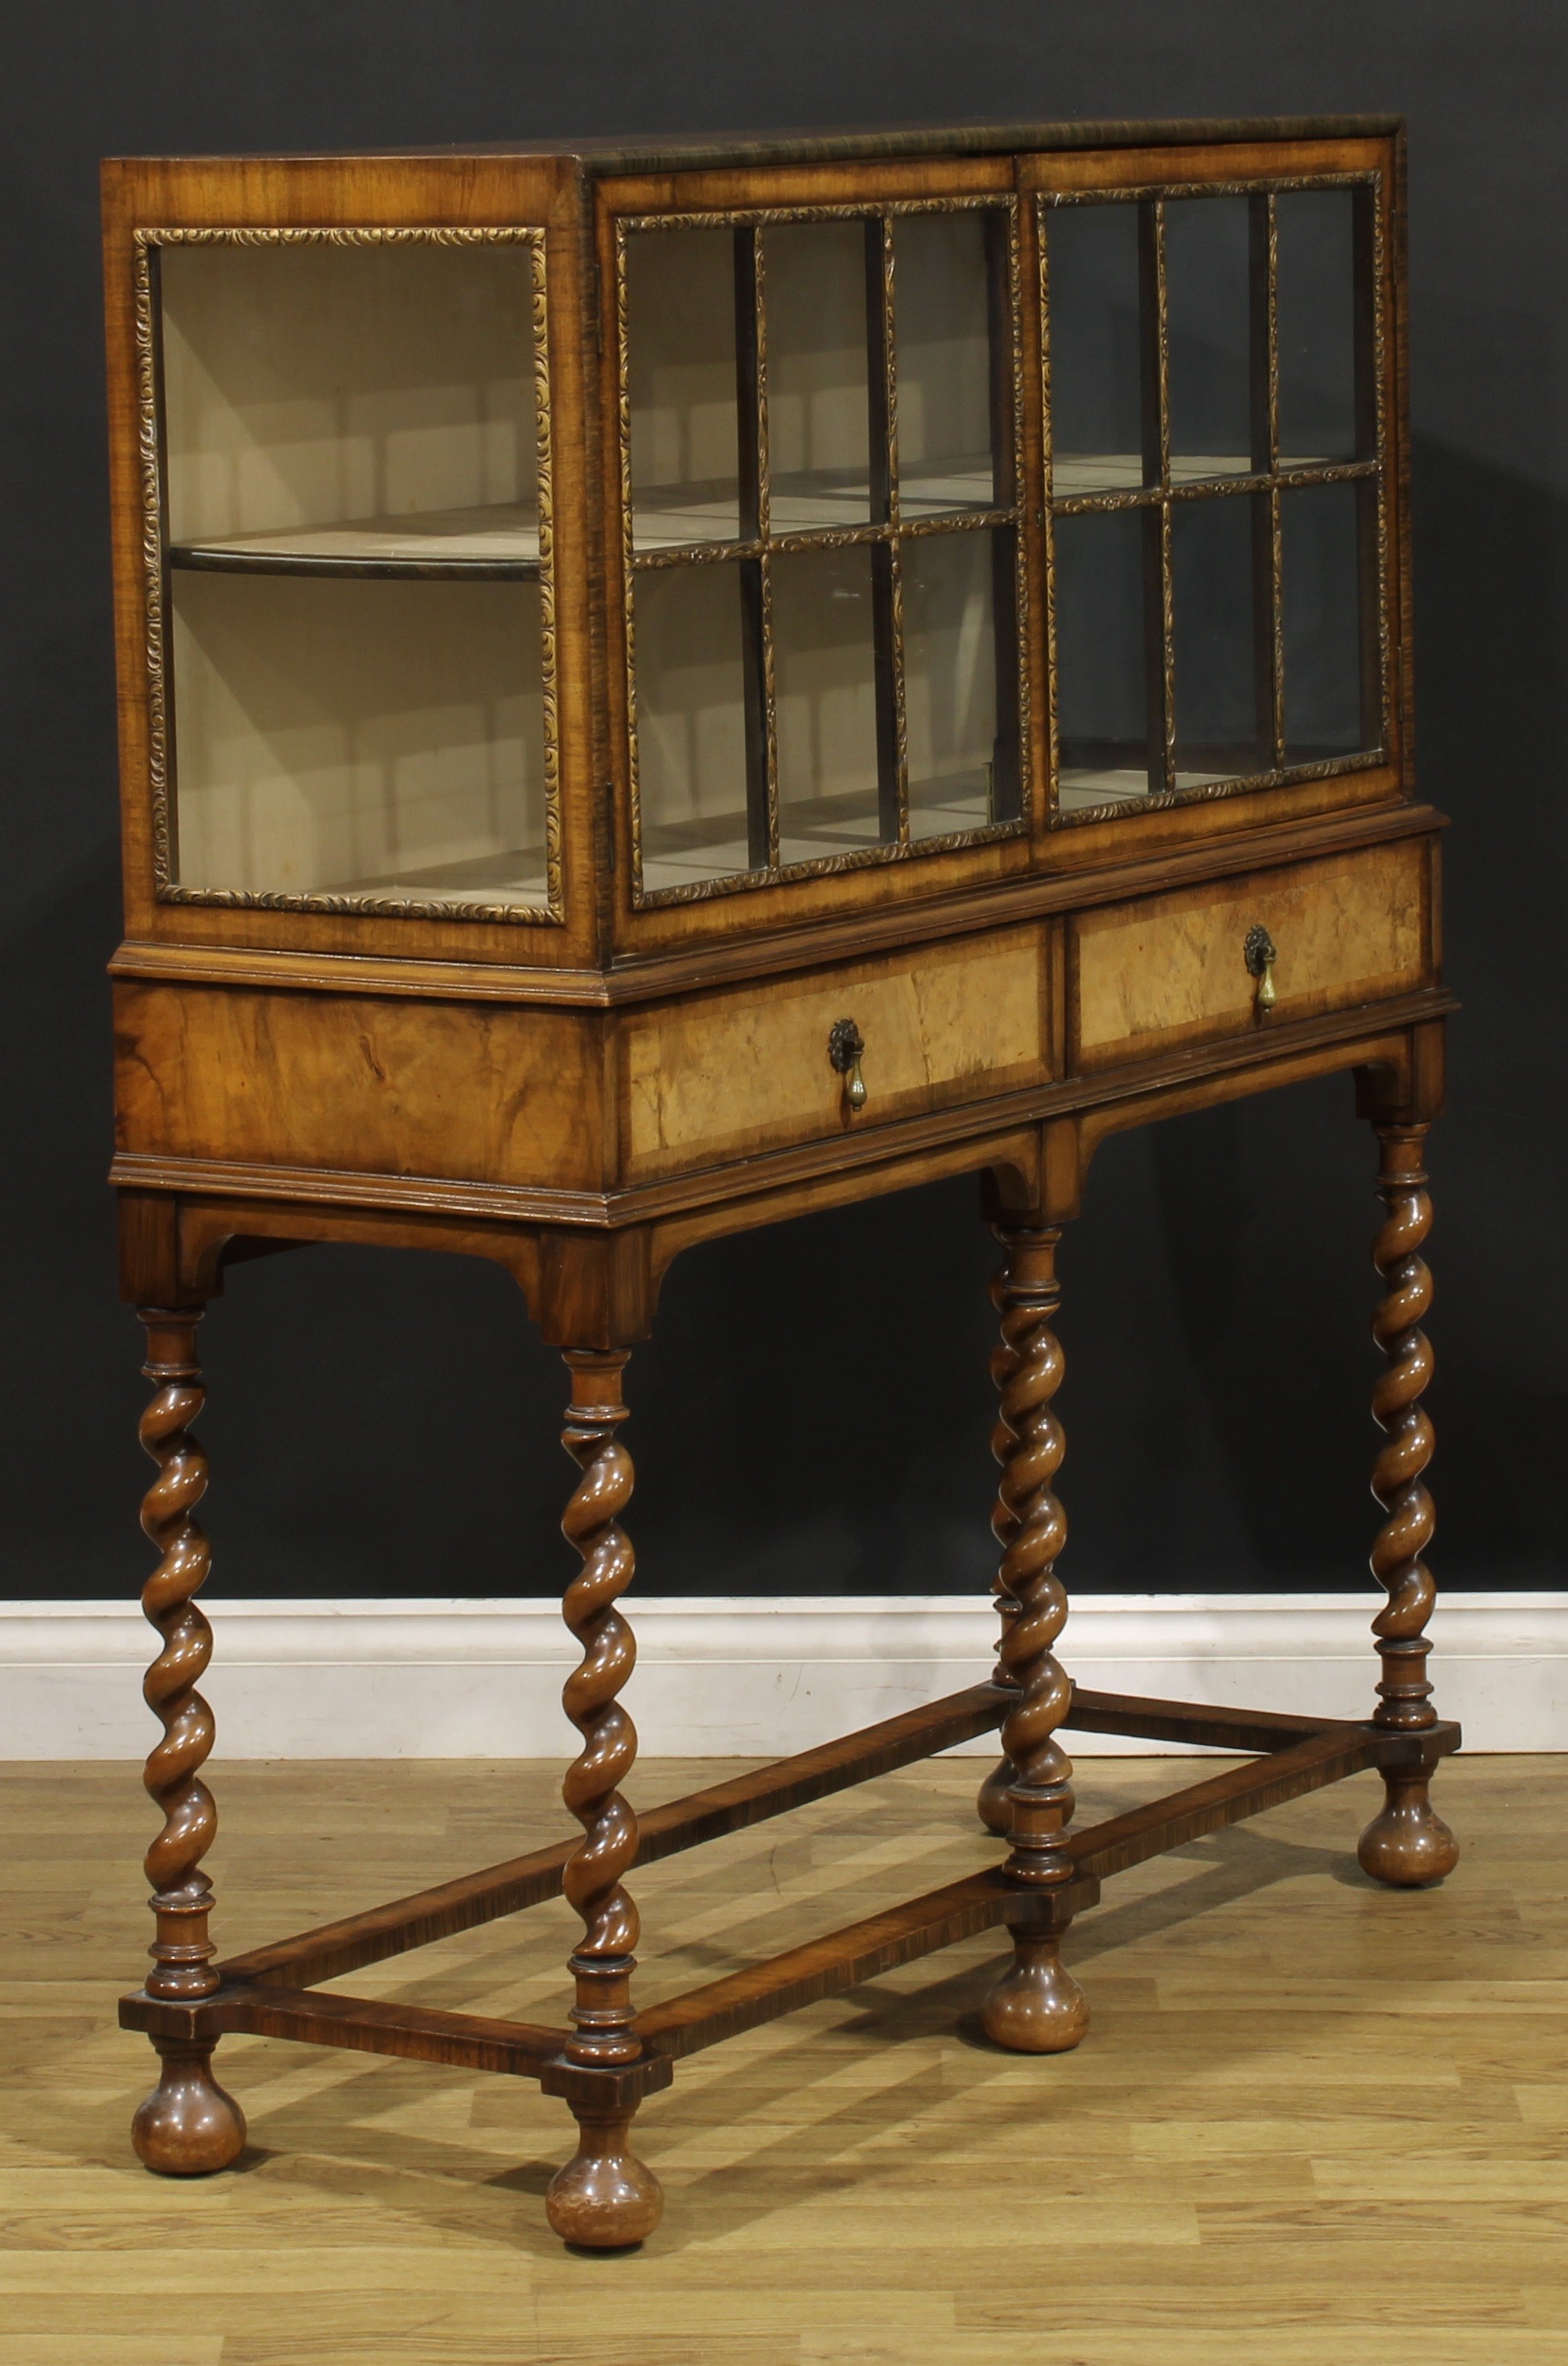 An early 20th century Queen Anne style walnut bookcase or display cabinet, by Hamptons, Pall Mall - Image 3 of 7